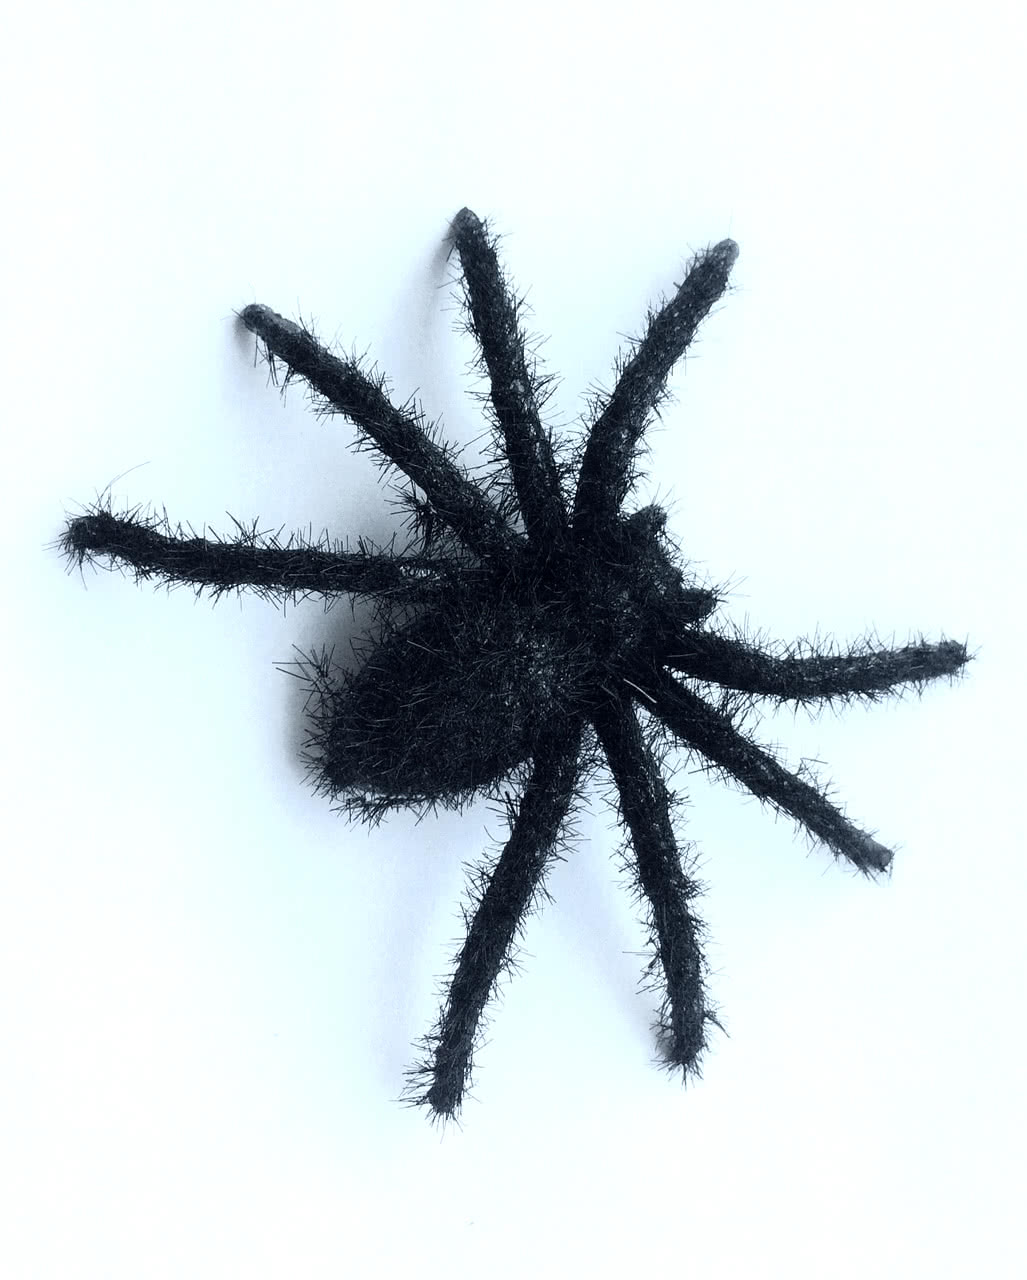 How To Make Spiders For Halloween Decorations